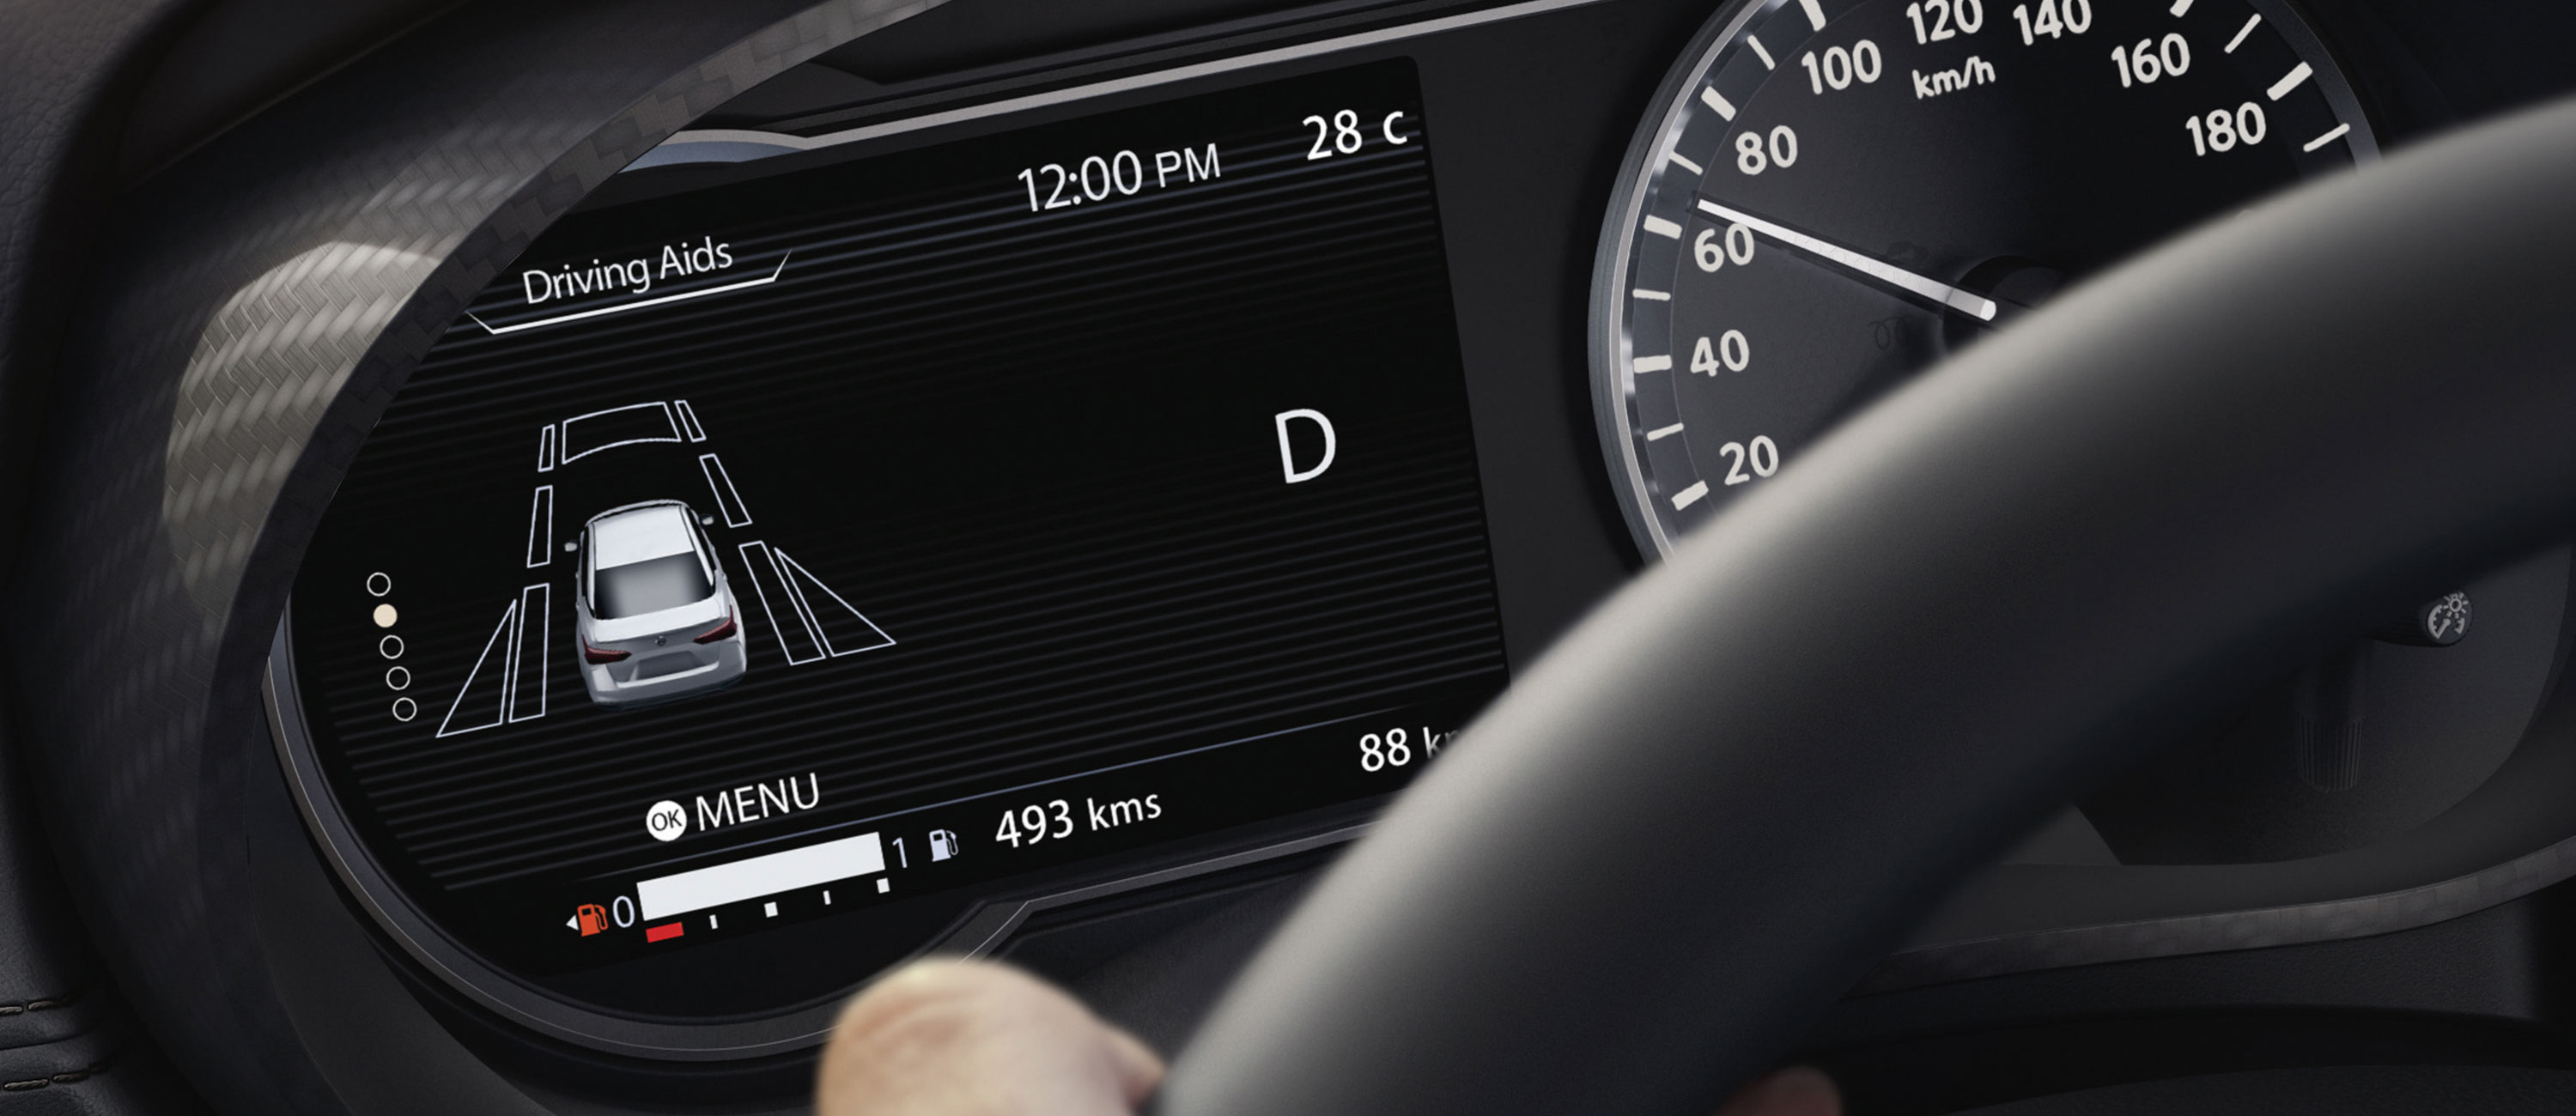 Nissan SUNNY Advanced Drive Assist Display showing tire pressure